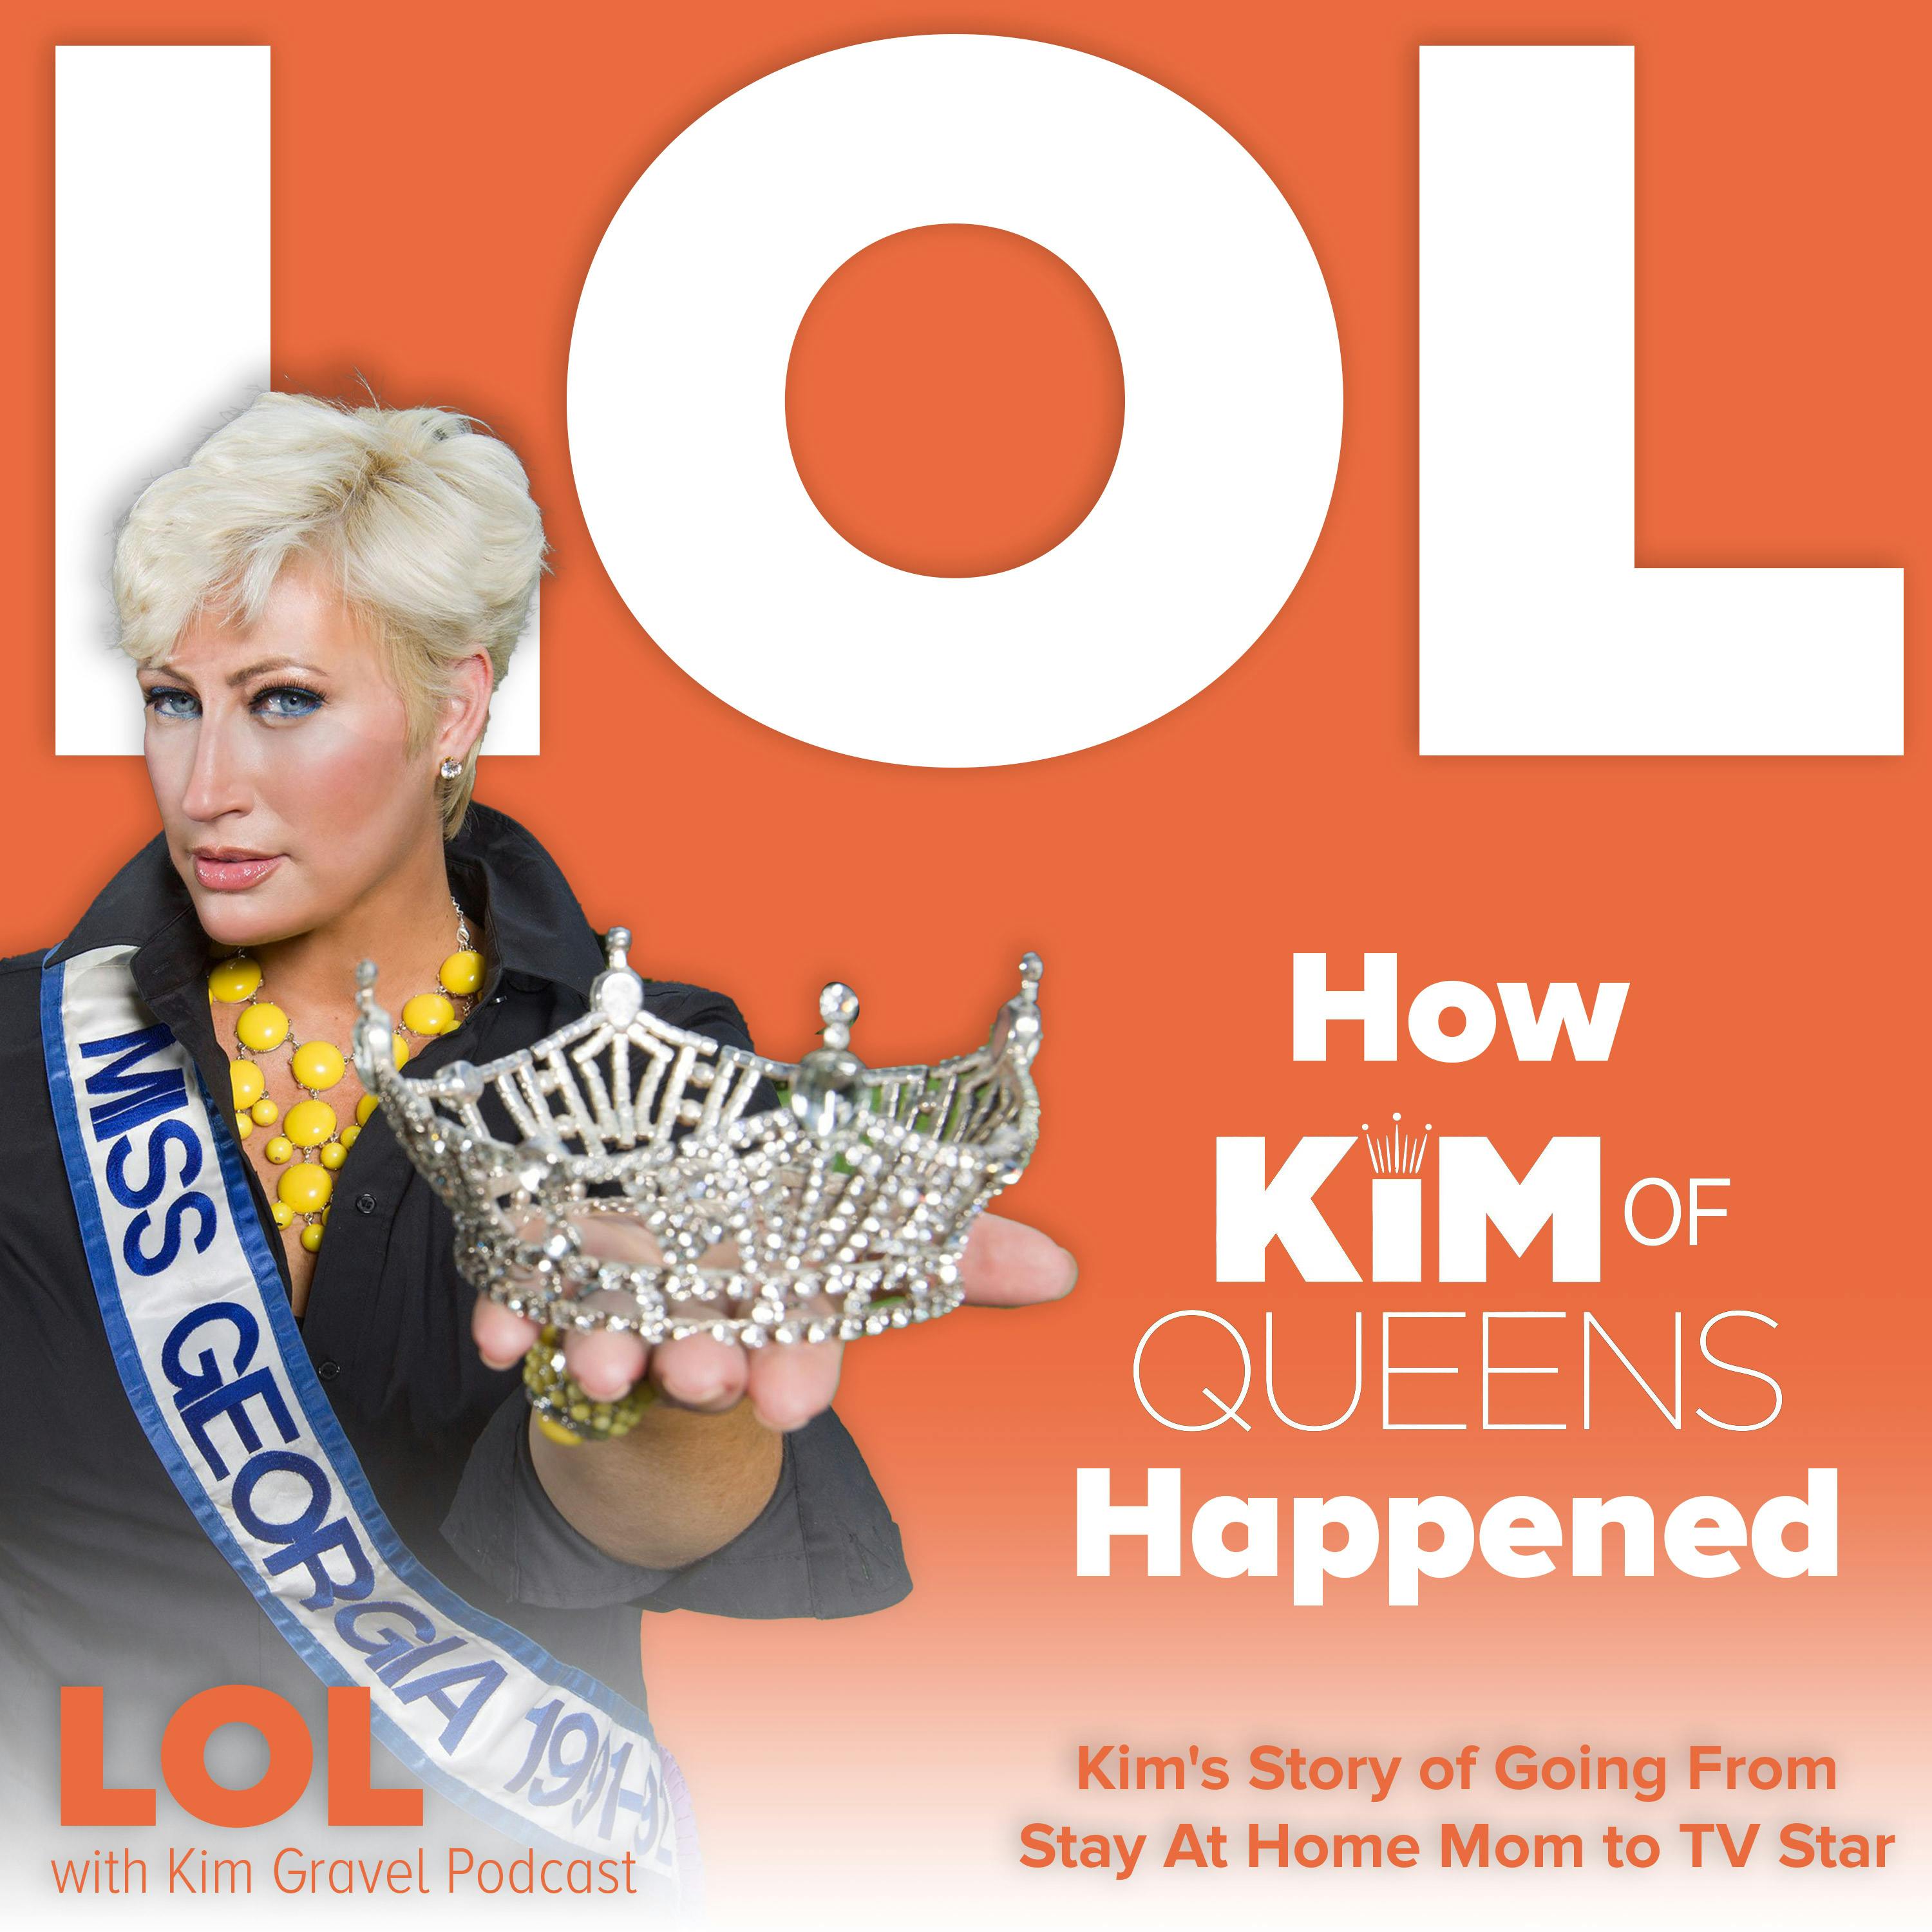 How Kim of Queens Happened: Kim's Story of Going From Stay At Home Mom to TV Star